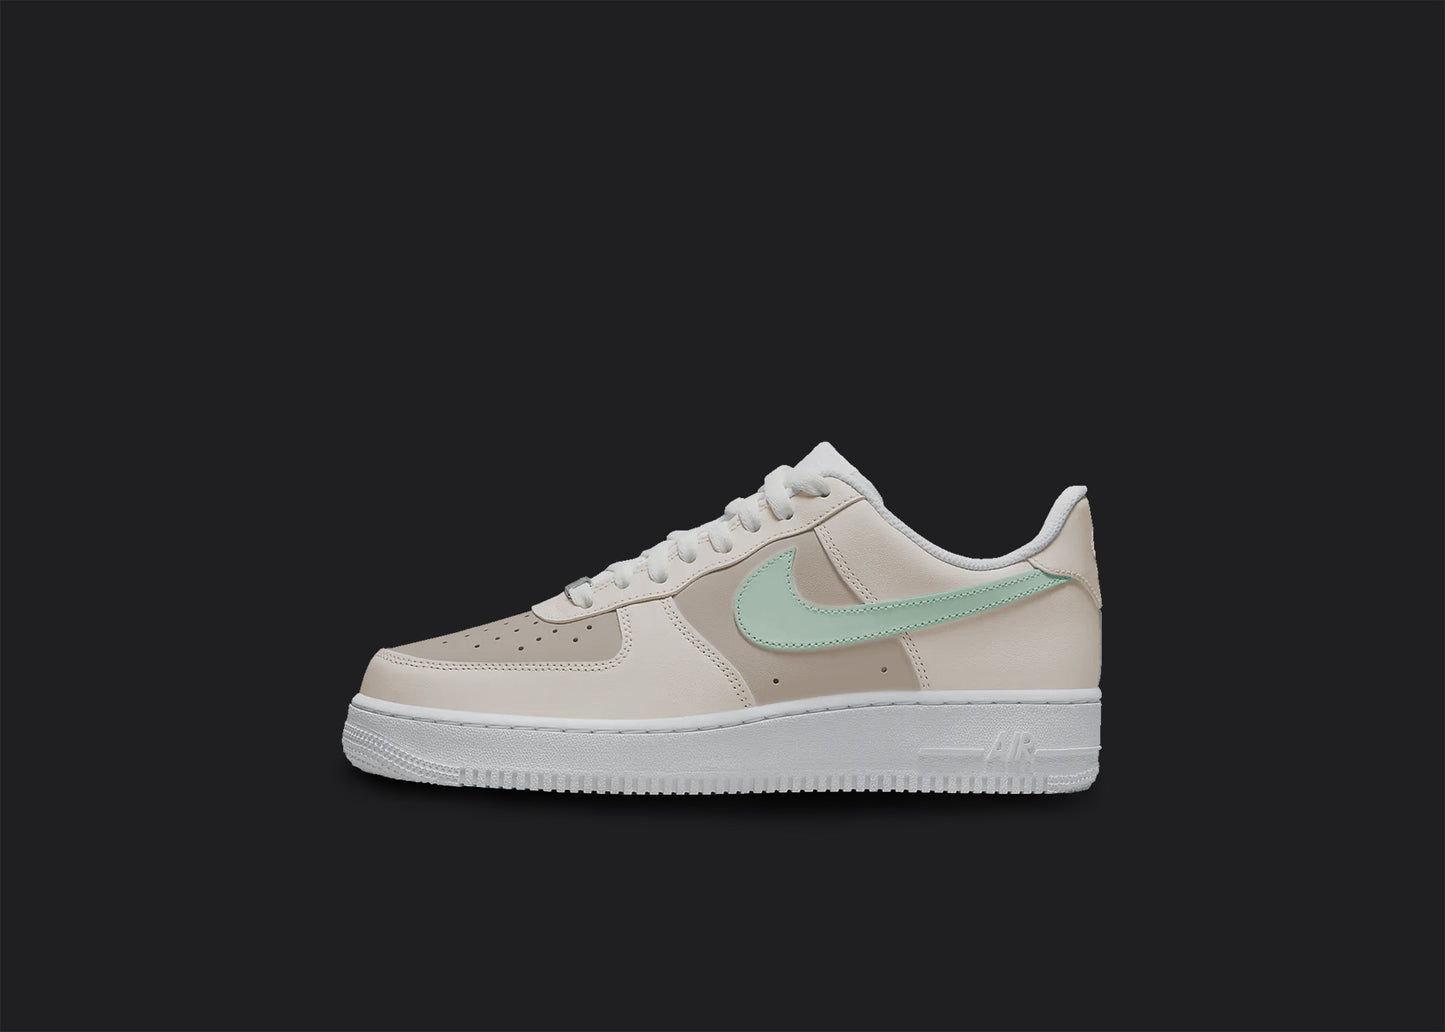 The image is of a Custom Nike Air force 1 sneaker on a blank black background. The white custom sneaker has a creme tone and a mint colored nike logo.